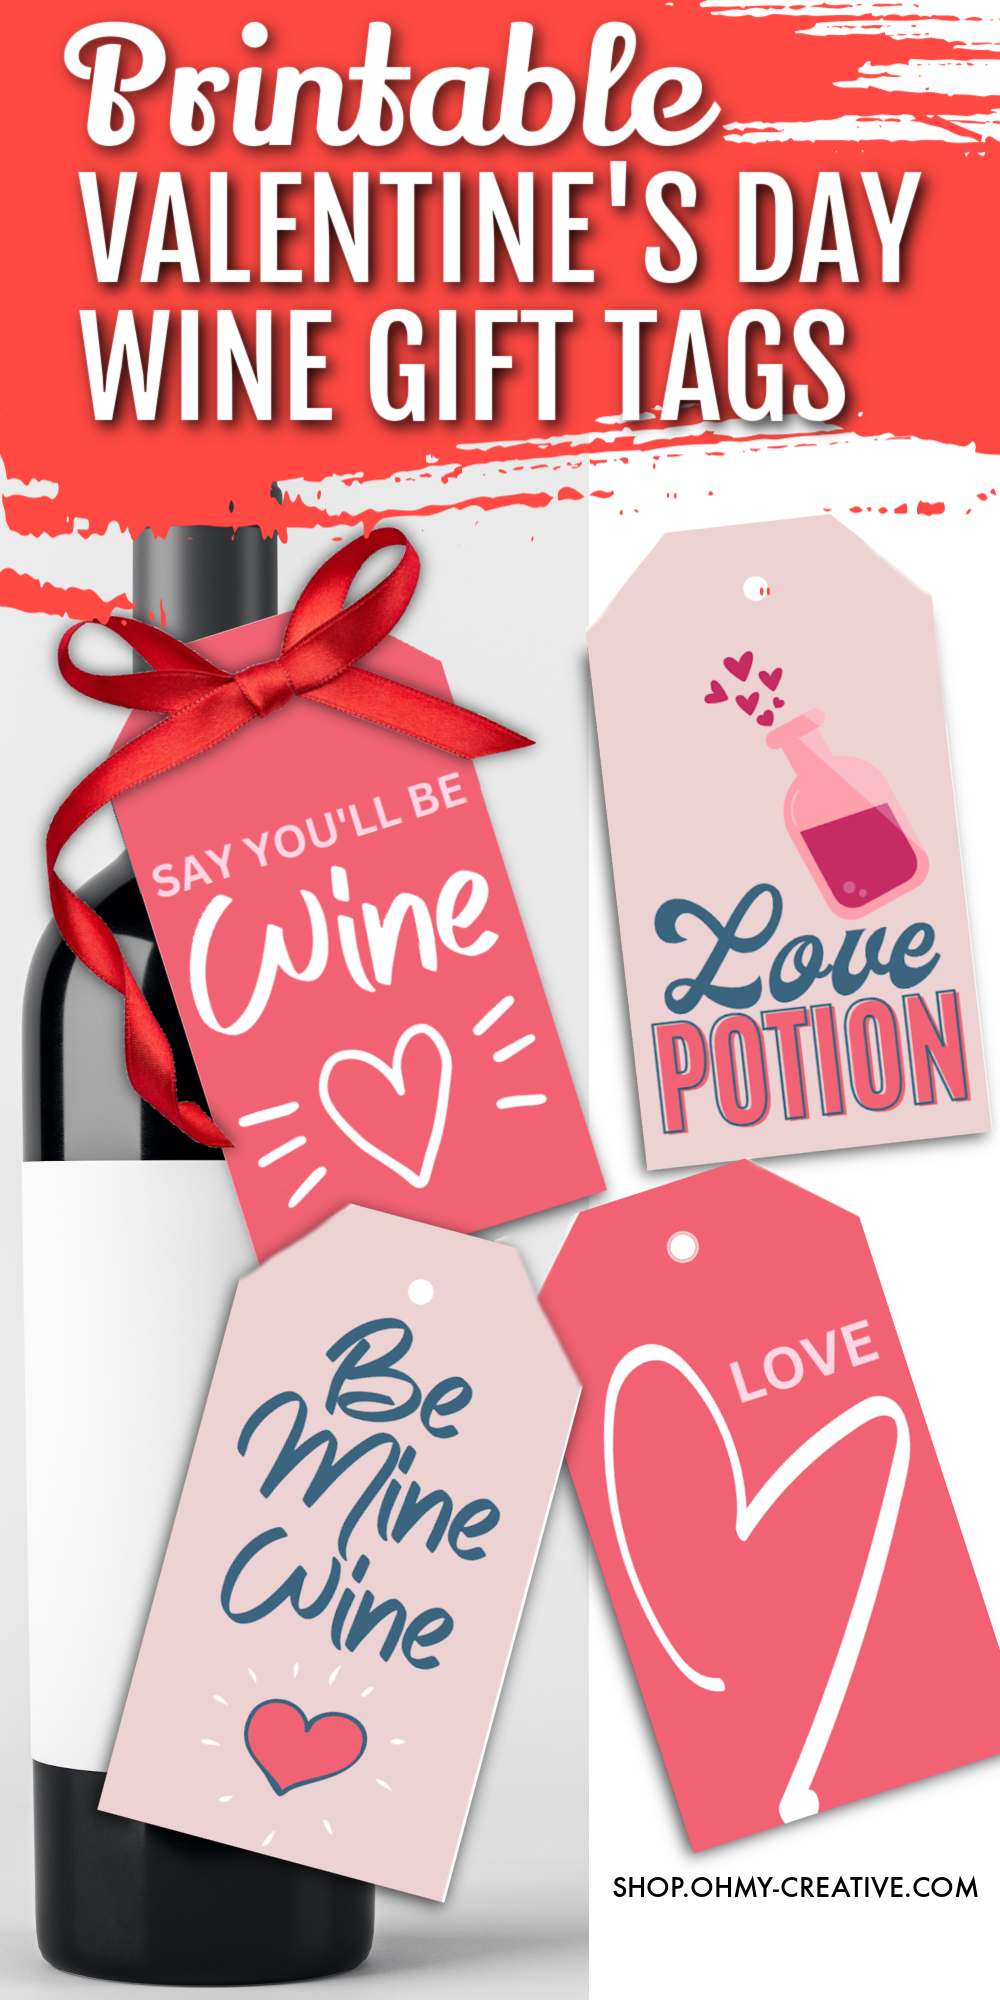 Four Valentine's Day gift tags for wine or other gifts for your Valentine gifts.